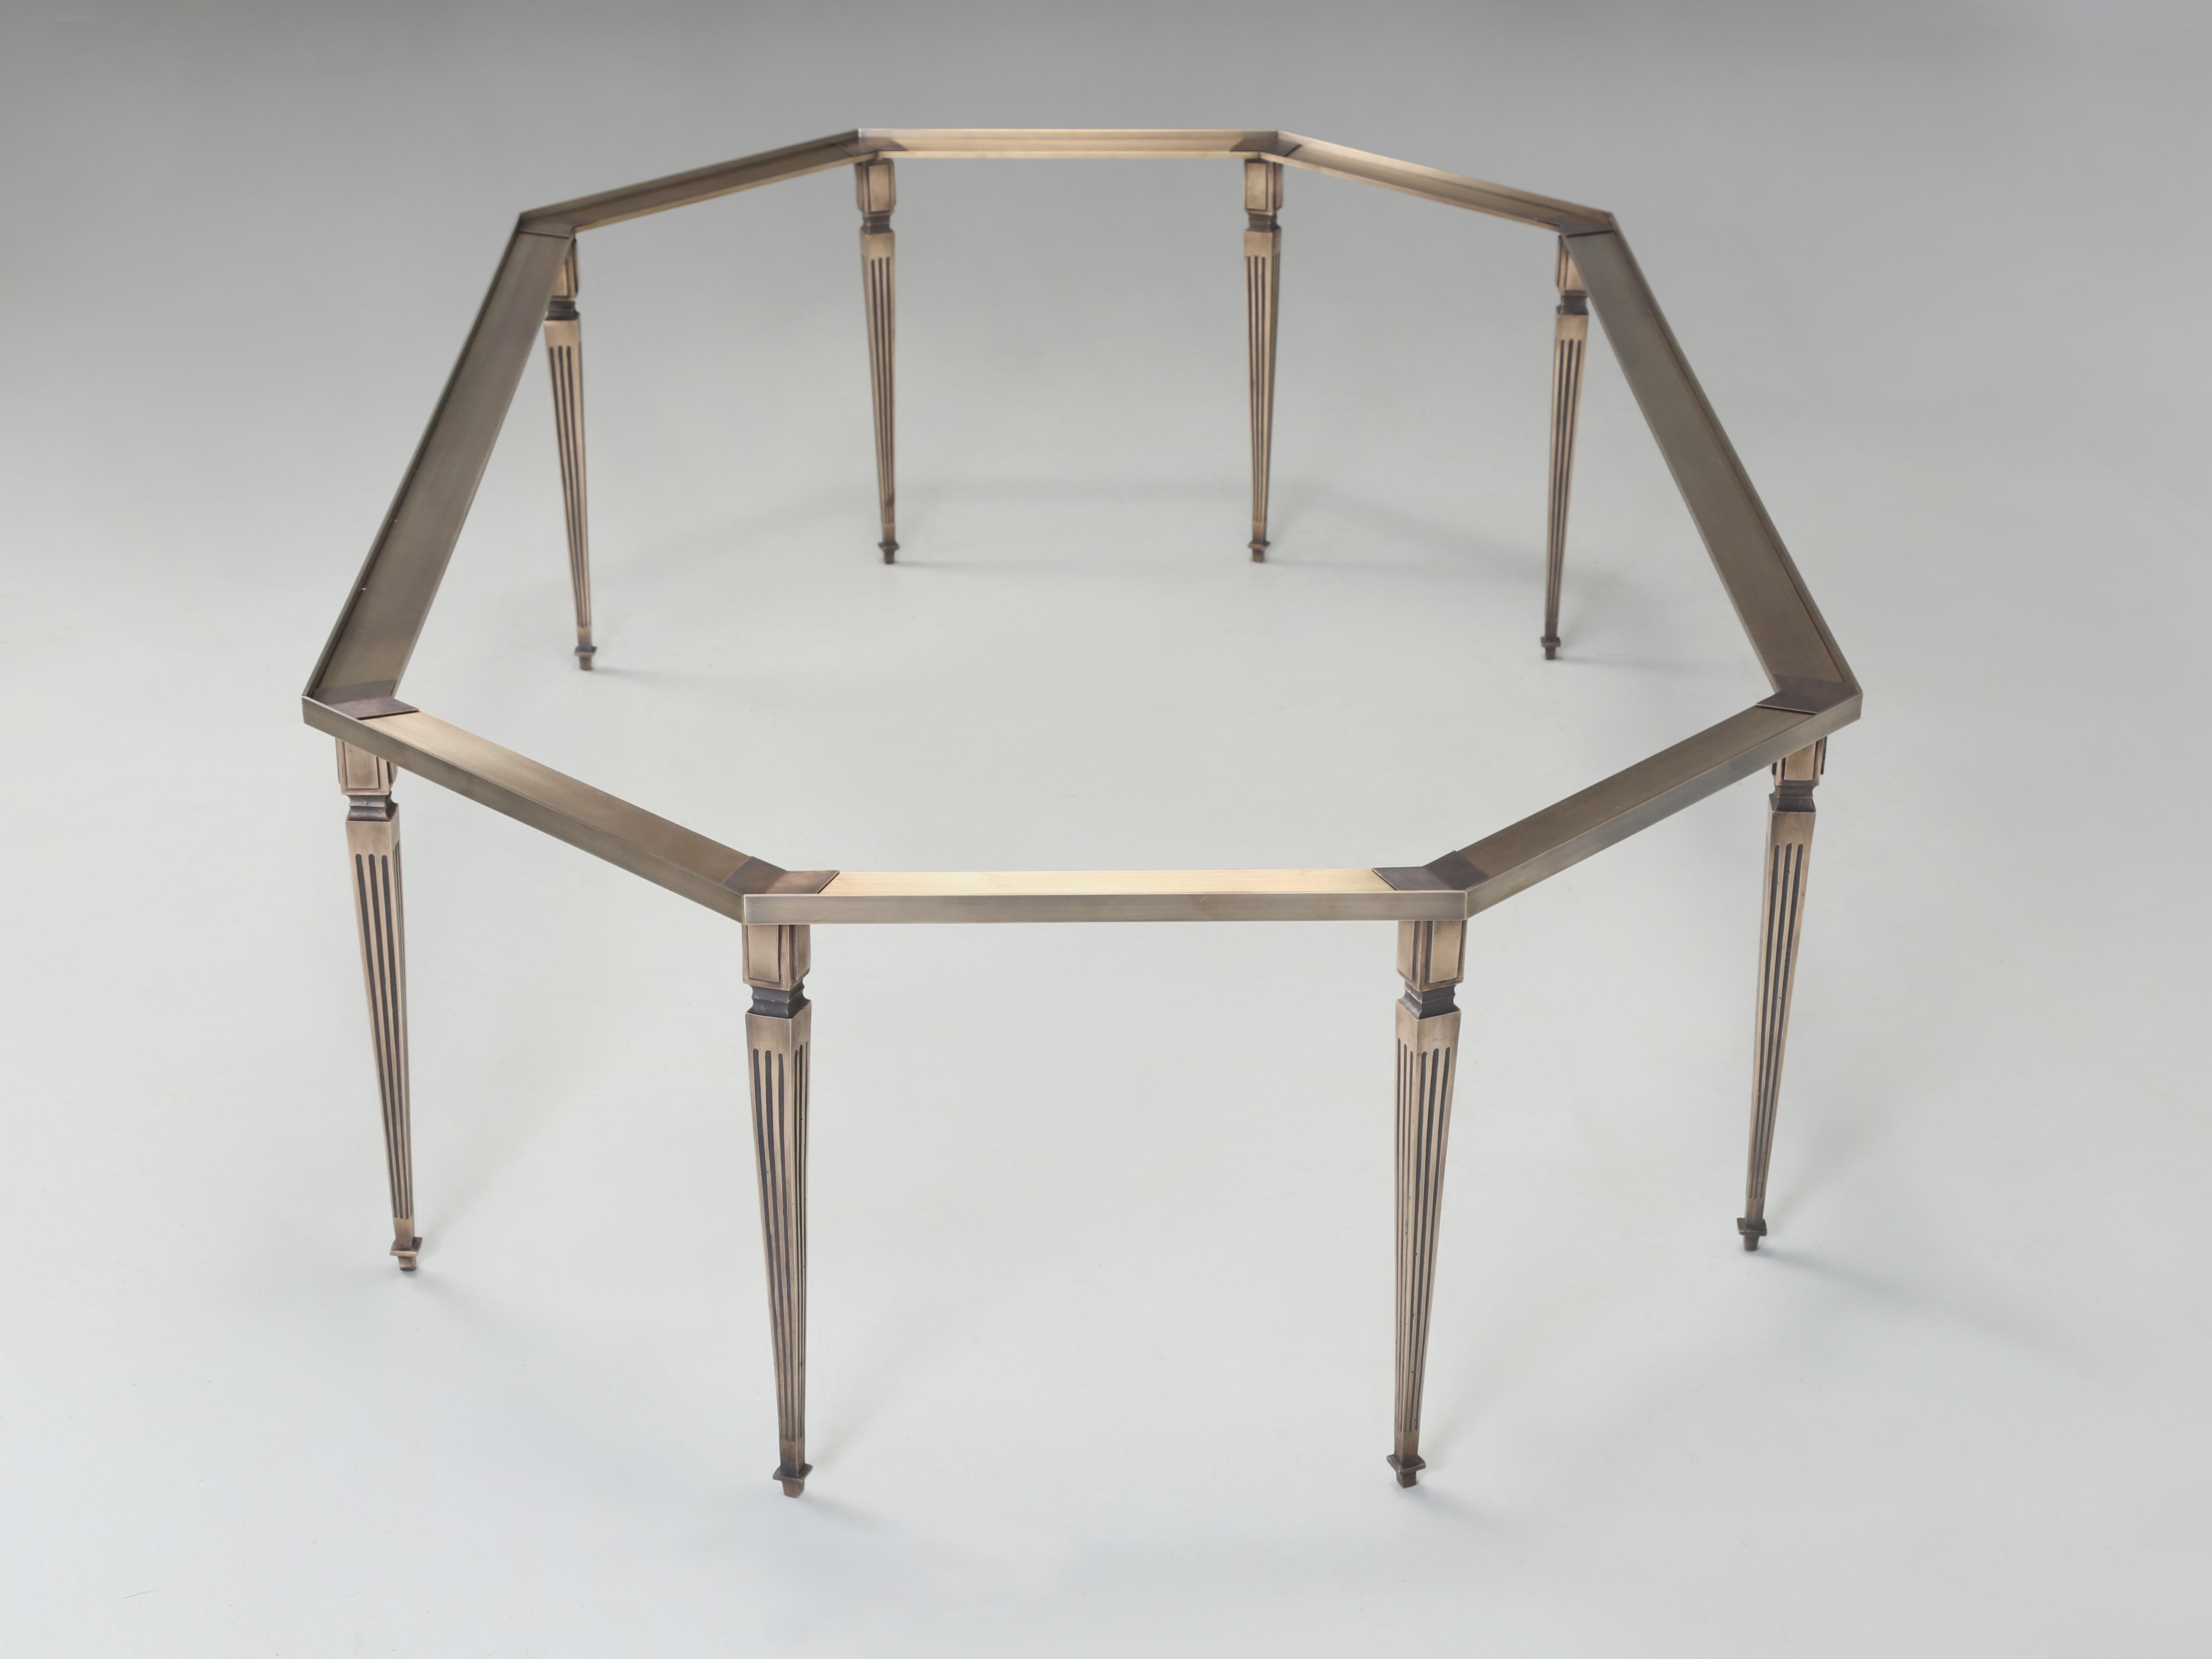 Cast French Inspired Louis XVI Style Bronze Coffee Table New in Most Shapes and Sizes For Sale